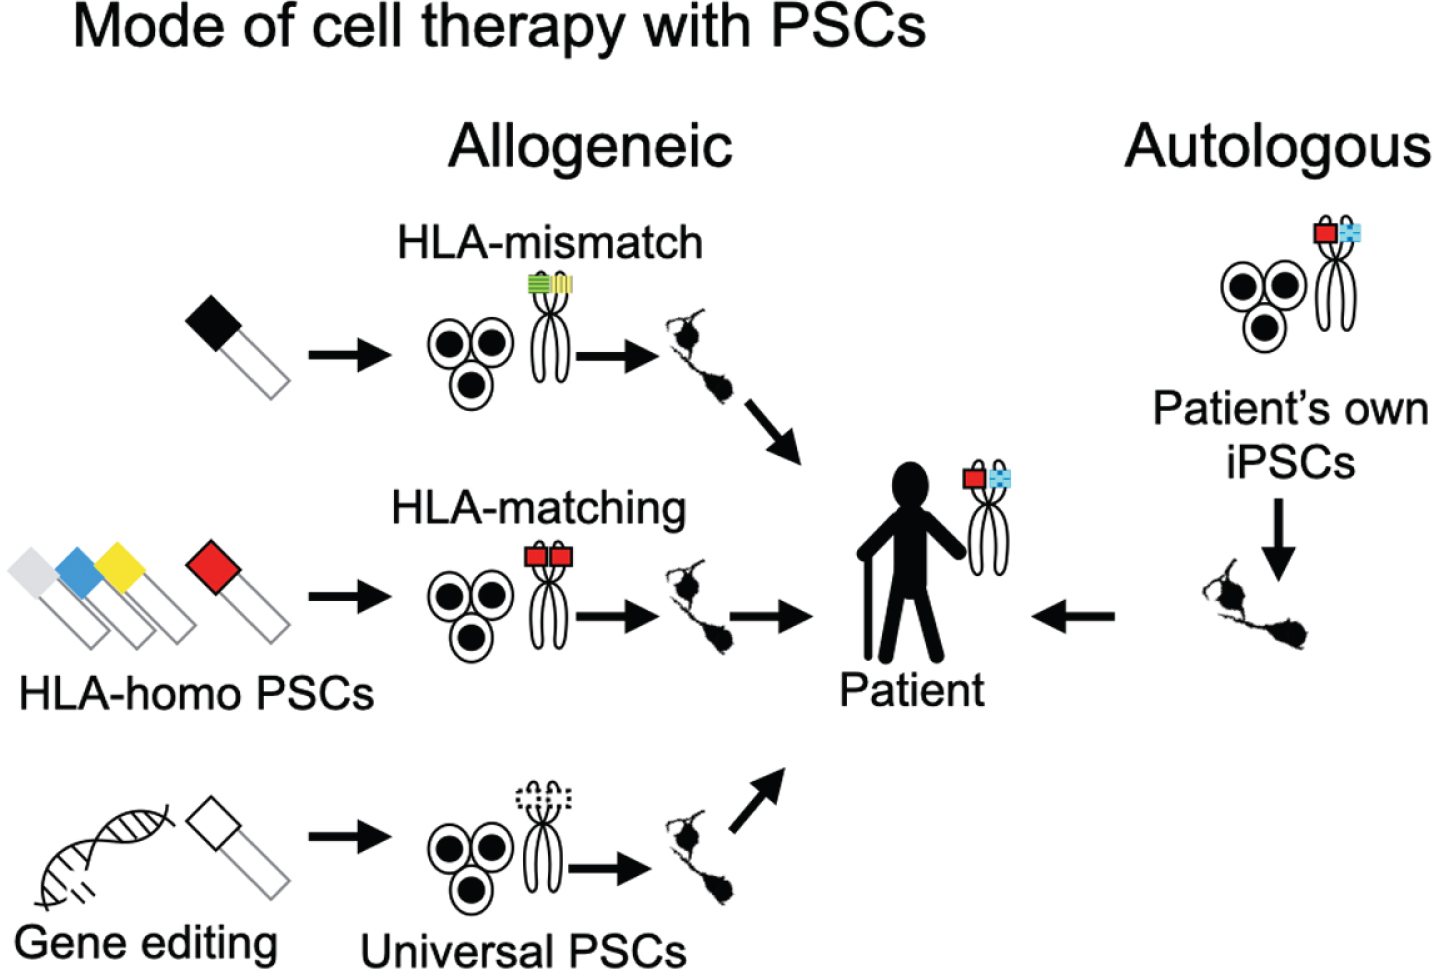 Modes of PSC-based cell therapies. Cell therapies using PSCs can be divided into two types from the perspective of the donor origin: allogeneic and autologous transplantations. Allogeneic transplantations are subdivided into HLA-mismatch transplantation, HLA-matching transplantation, and universal PSC-based transplantation. The colors and the patterns in the schema of the chromosomes indicate the haplotypes of HLA. For HLA-matching transplantation, cell lines with HLA-homologous haplotypes (HLA-homo PSCs) are normally used to increase the probability of matching. For clinical application, different HLA-homo PSC lines must be banked. Universal PSCs promise transplantations without inducing an immune response to any recipient. They can be derived by editing genes for T-cell responses (e.g., HLA-A, -B, -DR, PD-L1, CTLA4) and NK cells (e.g., HLA-C, -E, -G).